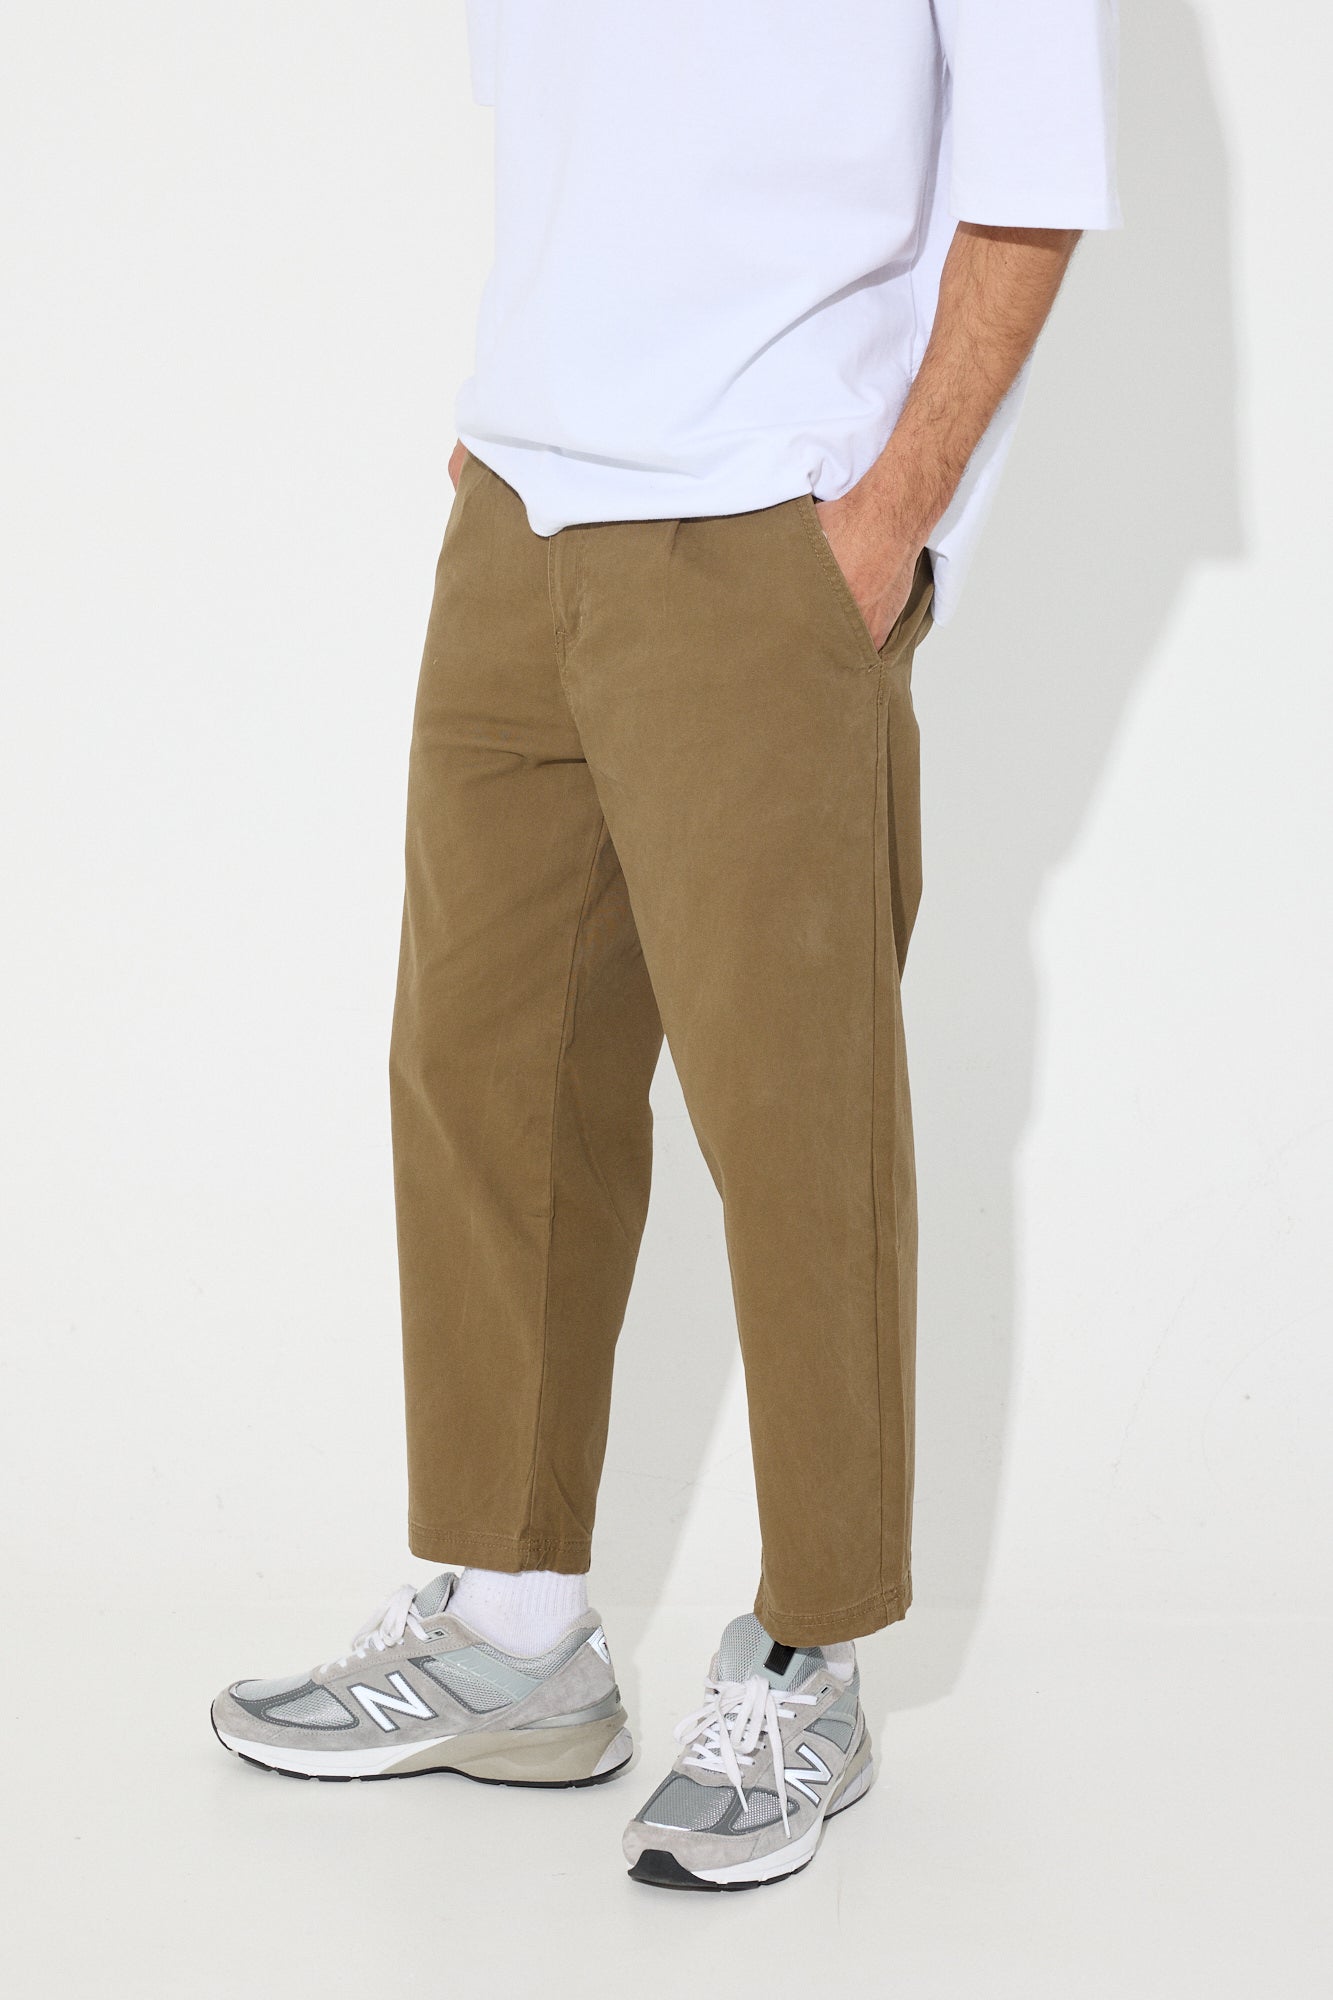 Ankle Grazer Trousers  The full DNA collection  YARDEN MITRANI